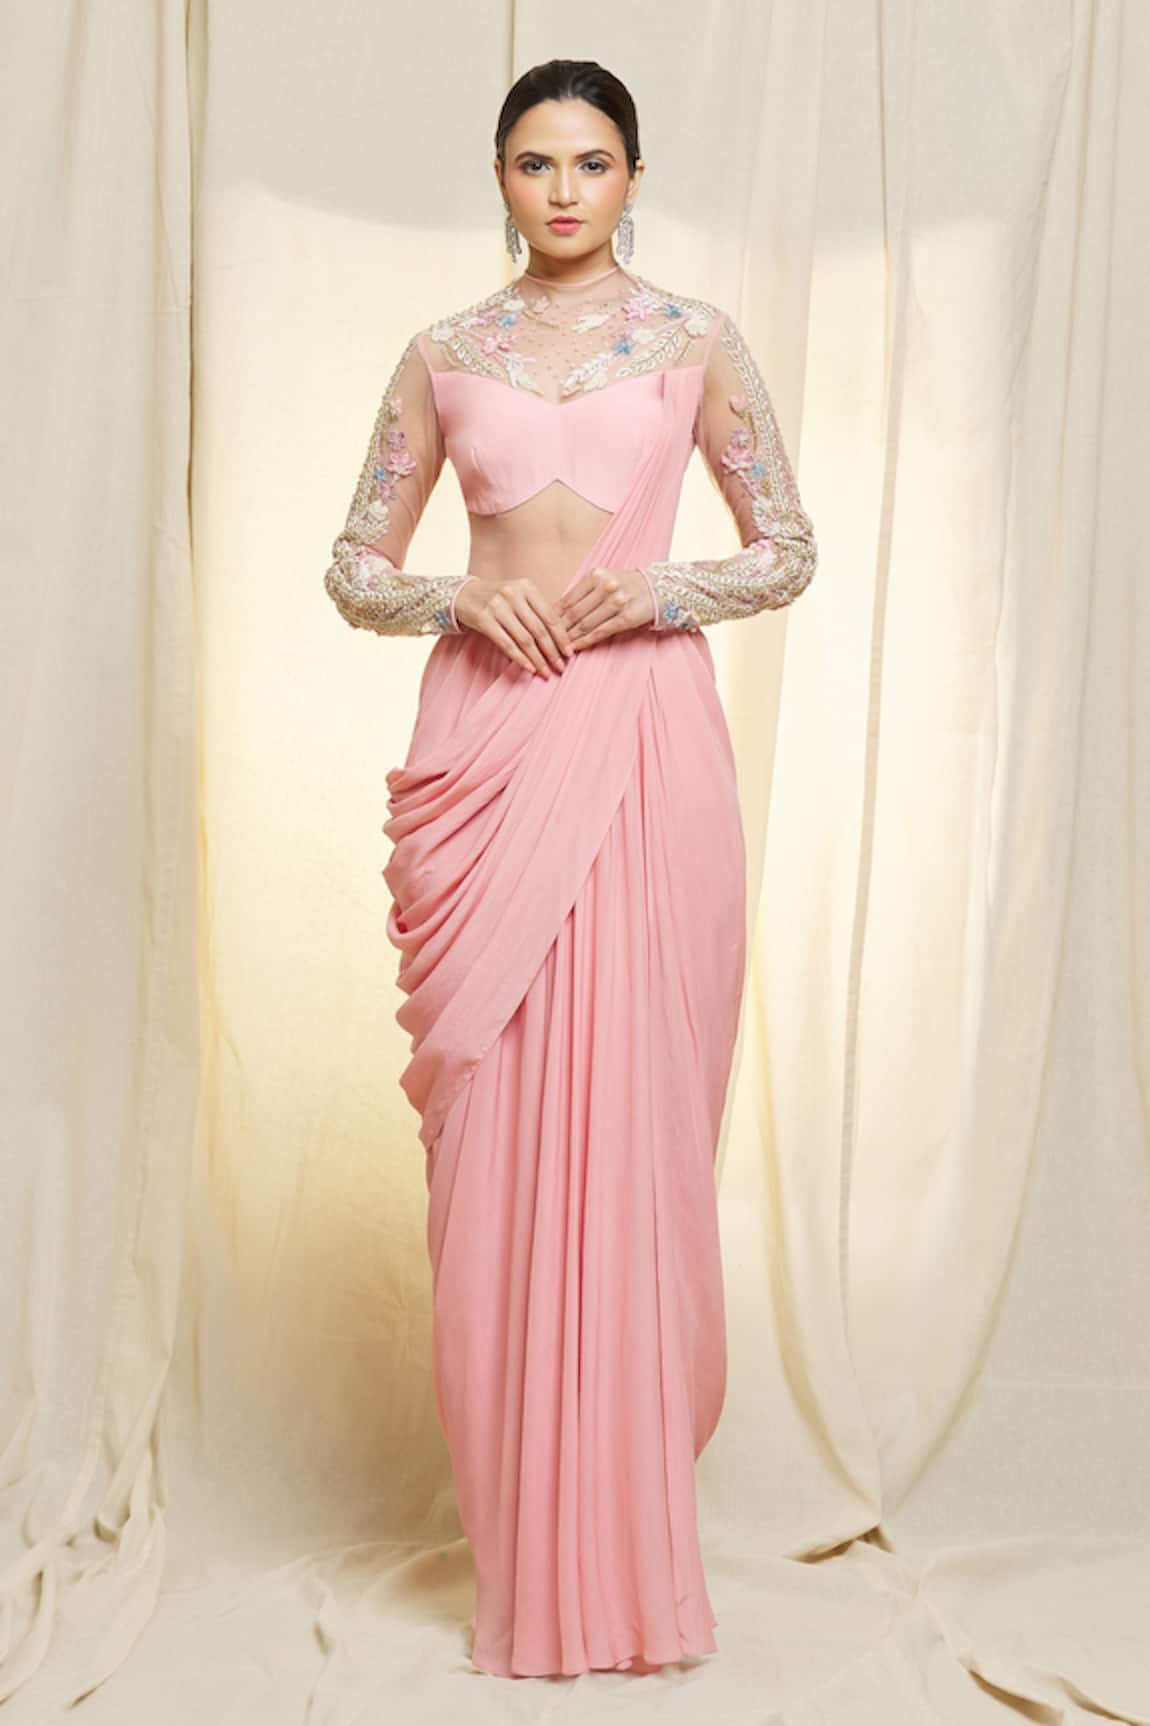 Vivek Patel Hand Embroidered Saree Gown